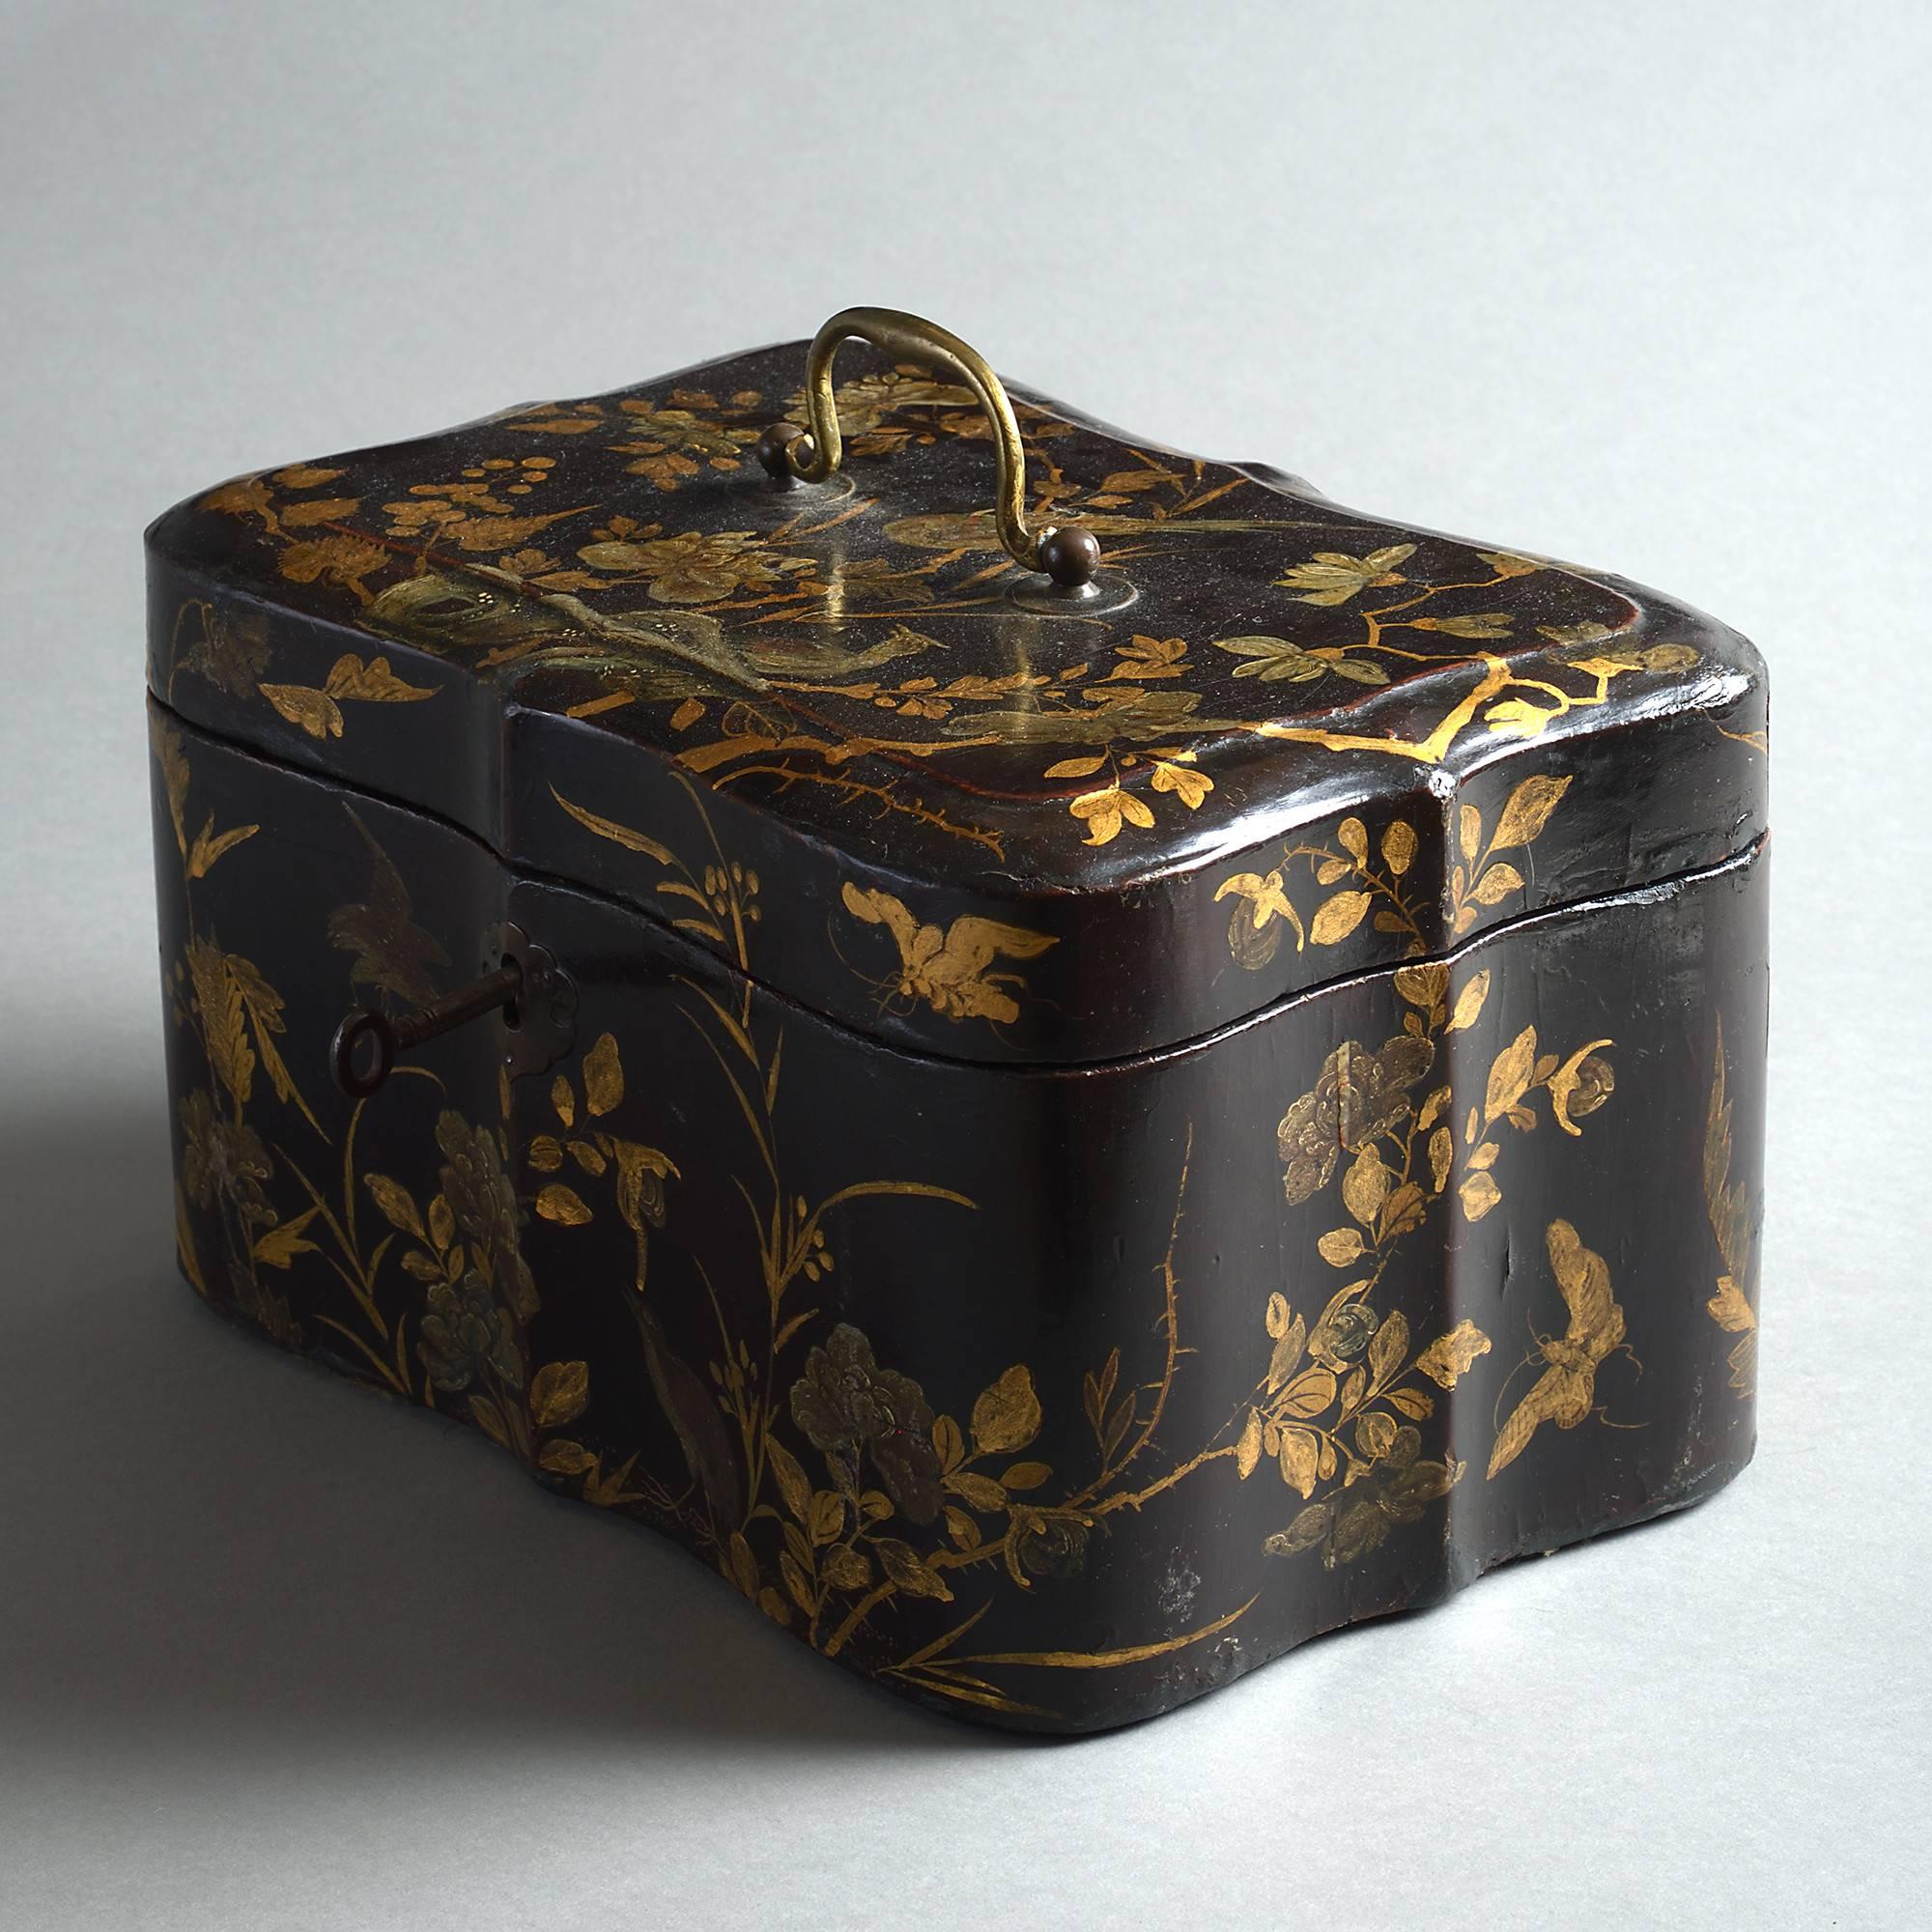 An 18th century Chinese Export black lacquer casket.